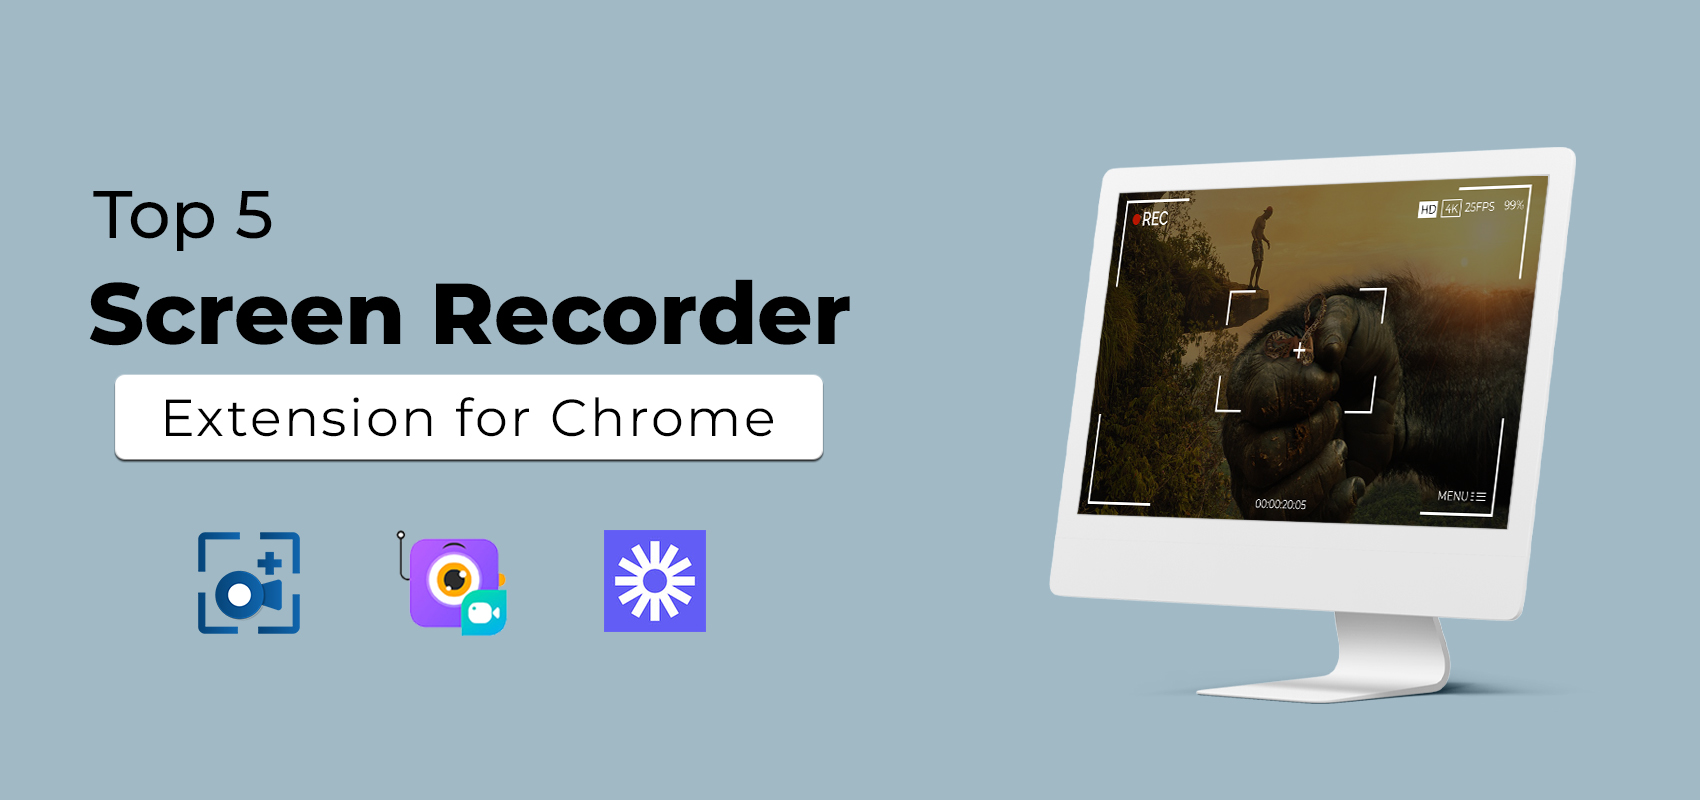 Top 5 Screen Recorder Extension for Chrome